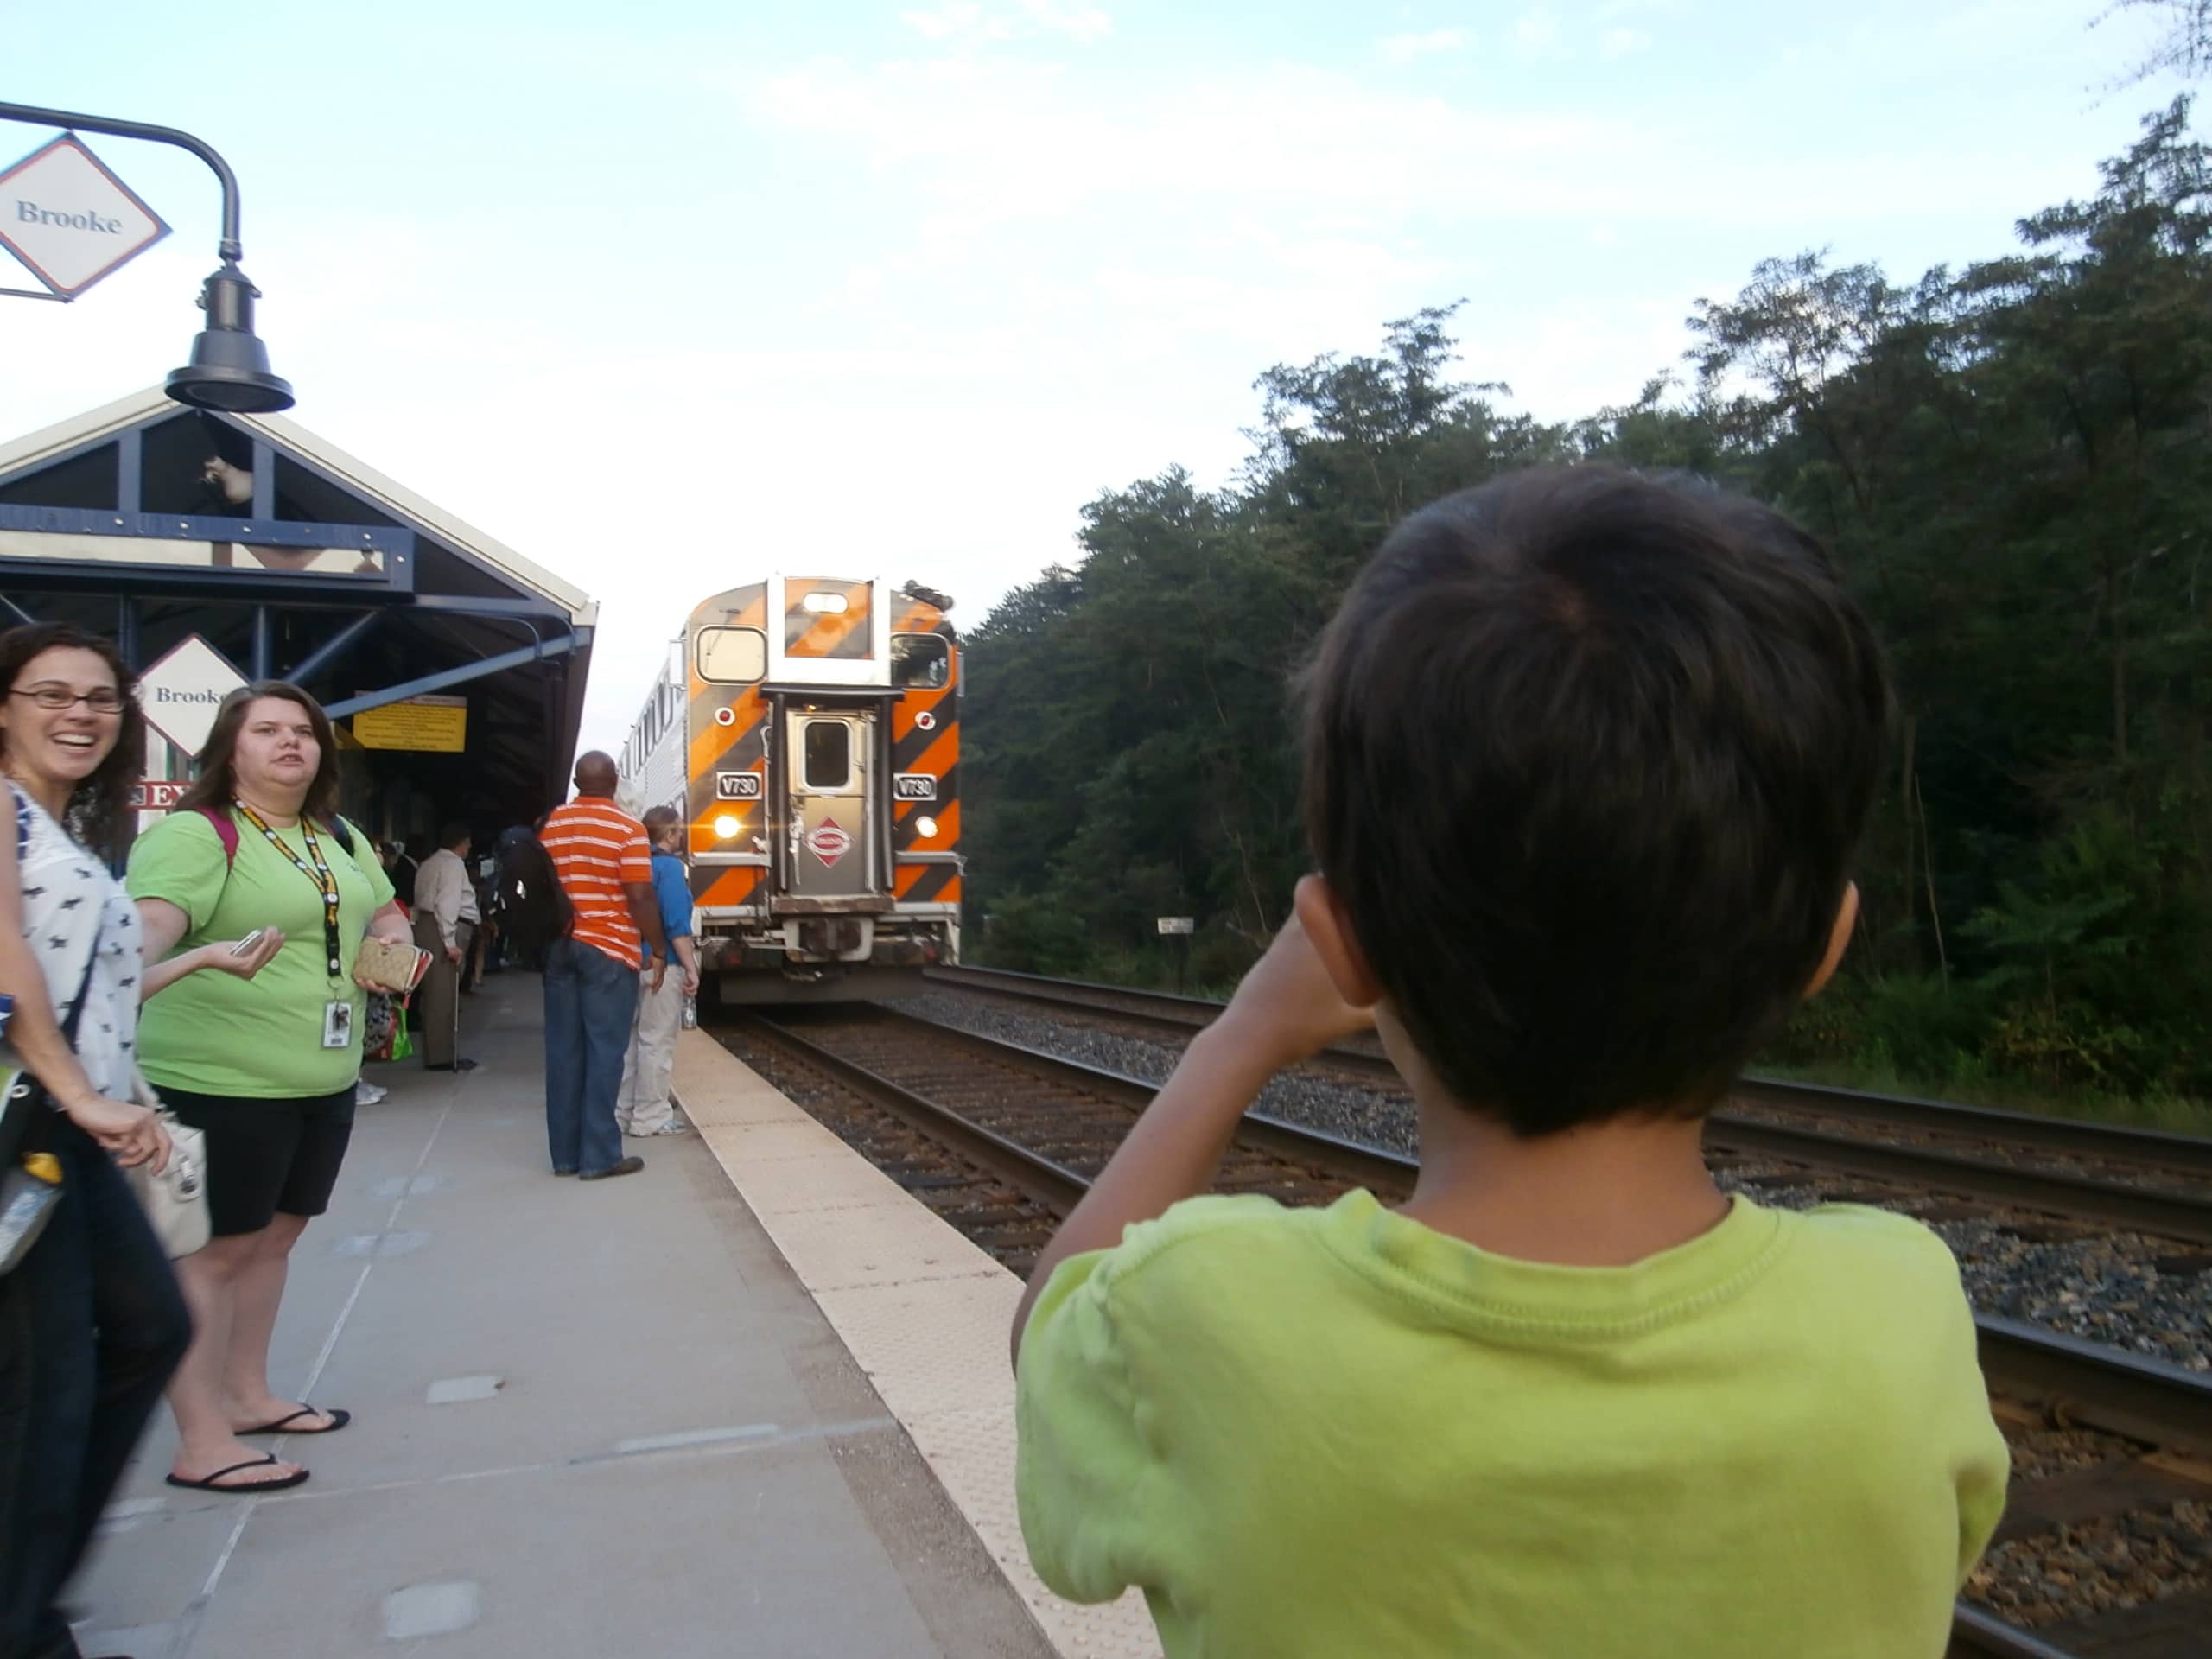 Grandson taking a picture of incoming VRE train - Brooke Station, Fredericksburg, Virginia